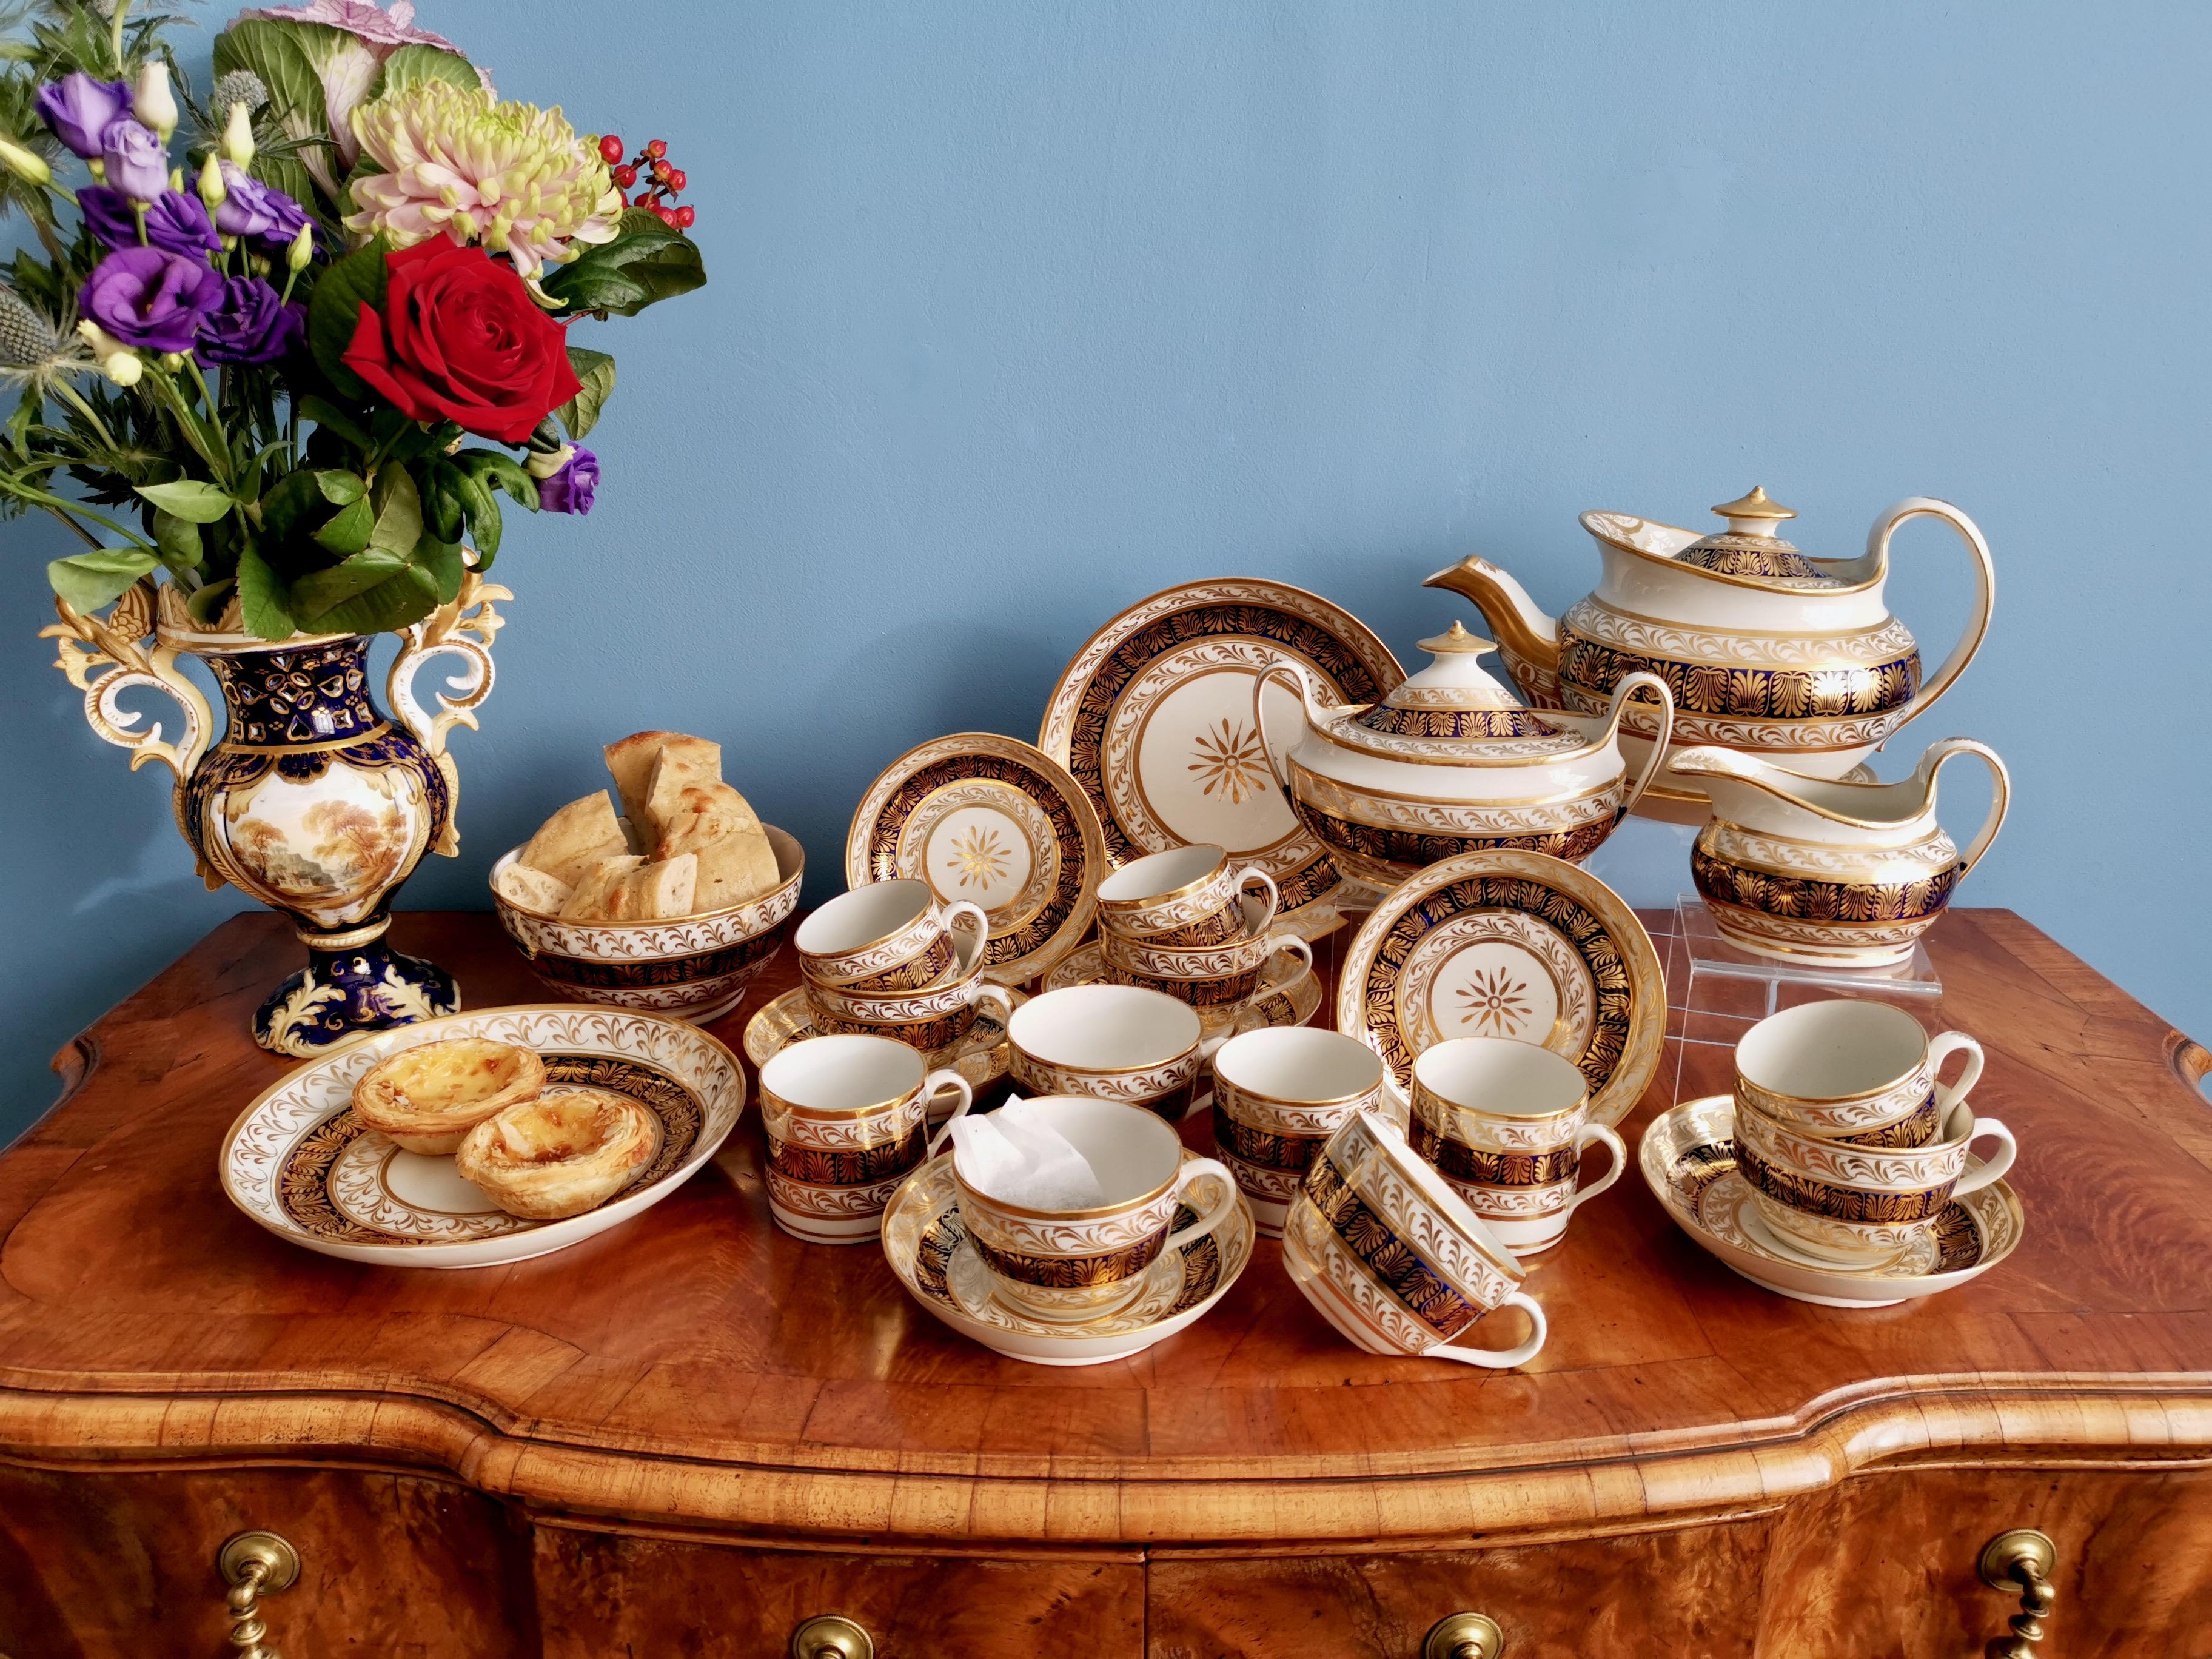 This is spectacular full tea service made by New Hall around the year 1810. The service consists of a lidded teapot on a stand, a lidded sucrier, a milk jug, six teacups and saucers, six coffee cans, two large cake plates of different sizes, and a